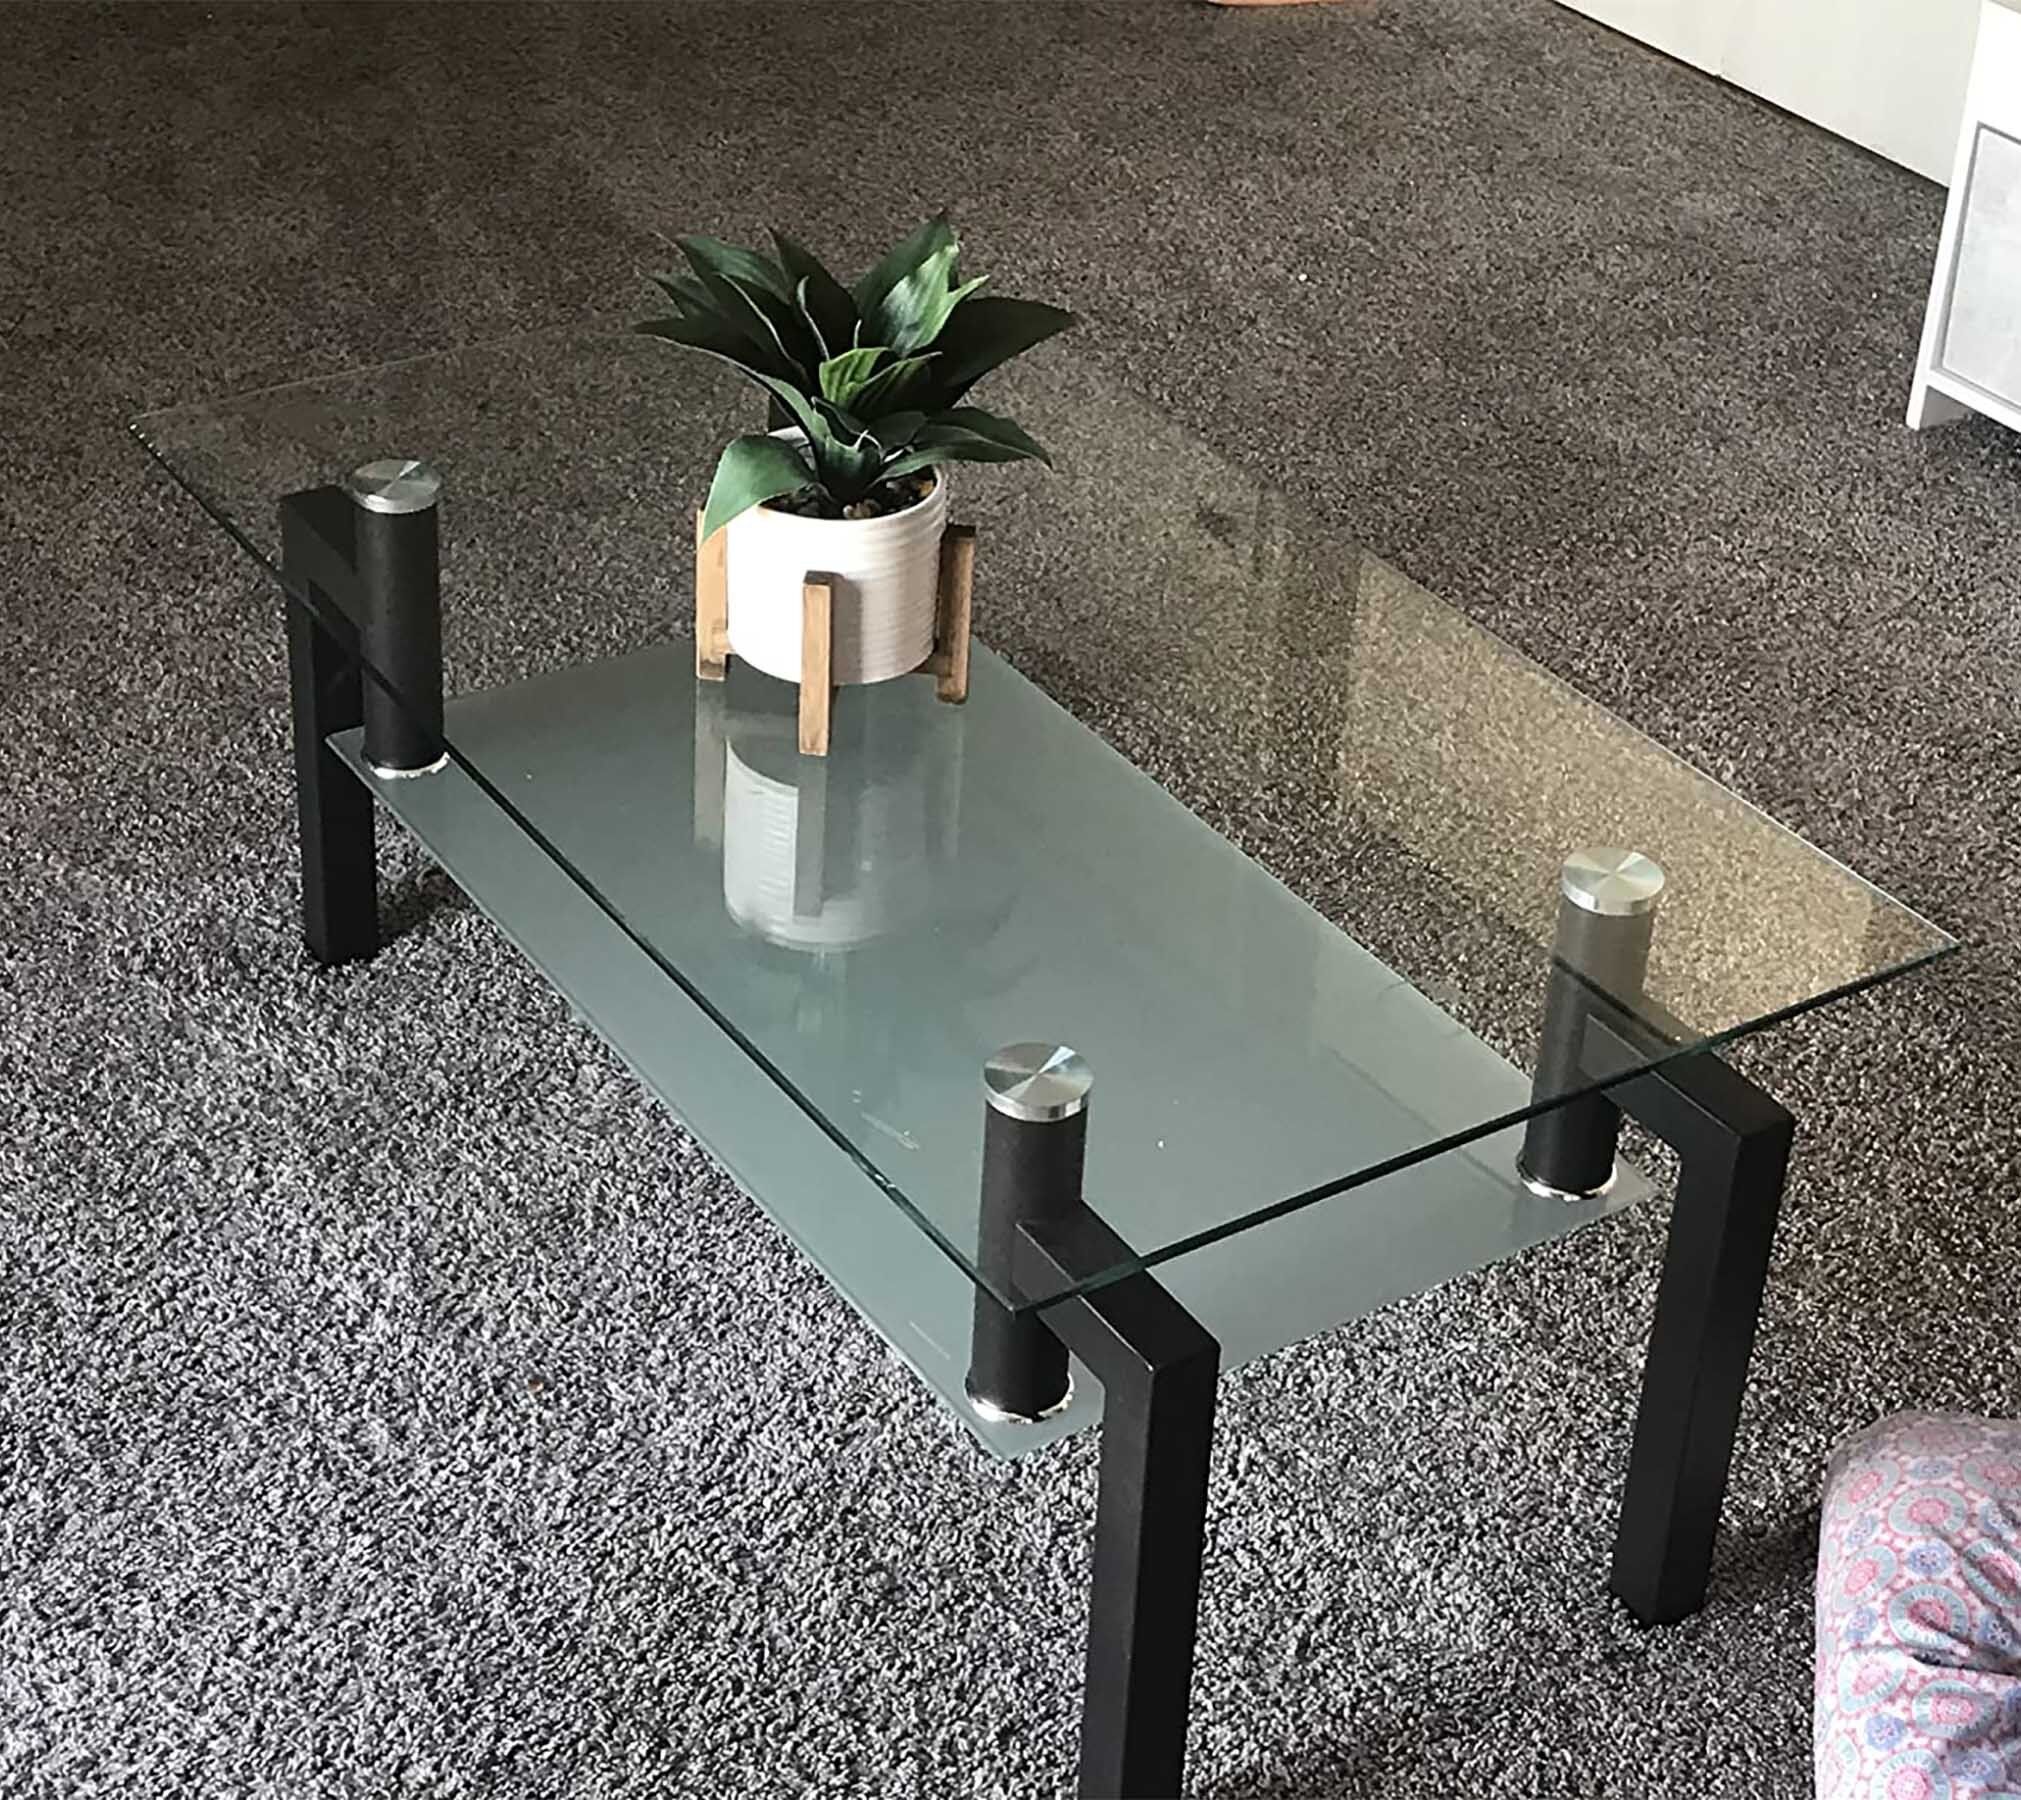 Orren Ellis Modern Glass Coffee Table With Storage,2 Tier Center Clear Coffee  Tables With Tempered Glass Tabletop & Metal Legs For Living Room | Wayfair Within 2 Tier Metal Coffee Tables (View 8 of 20)